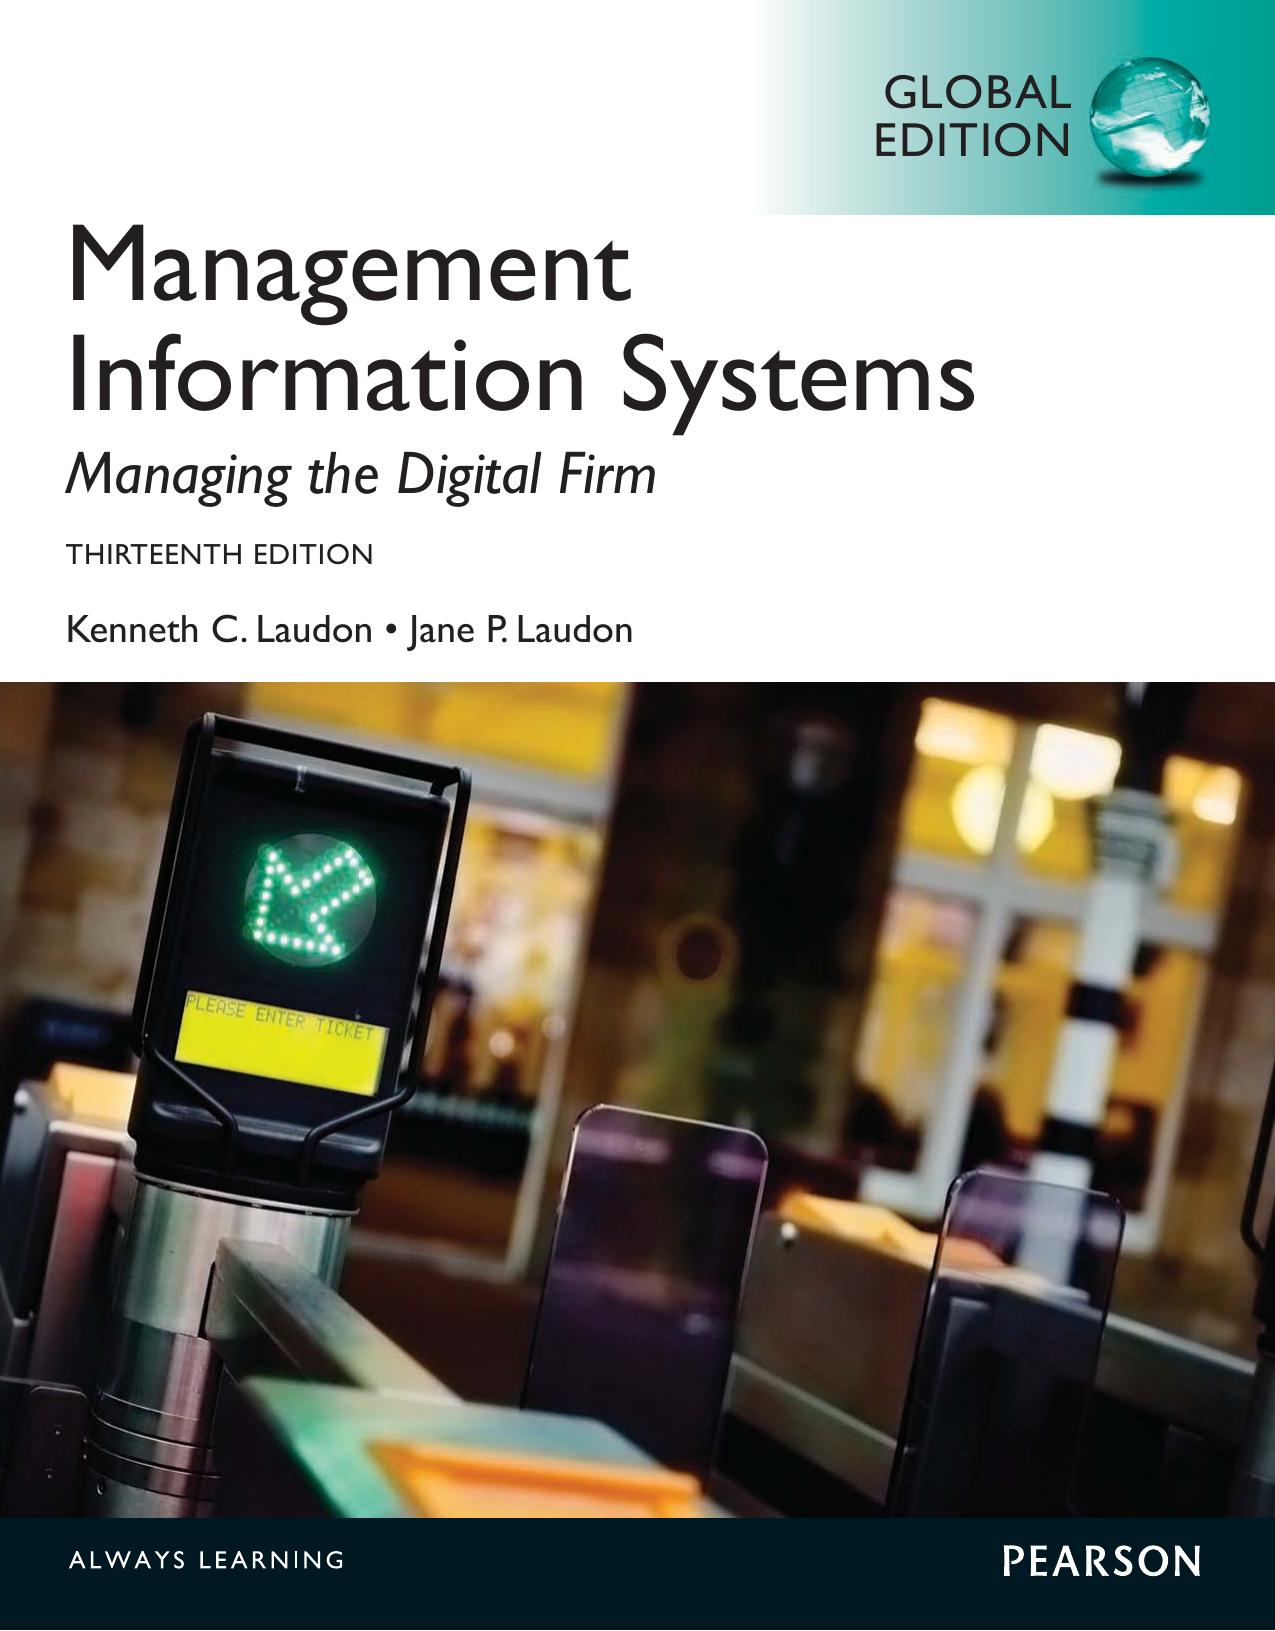 management-information-systems-managing-the-digital-firm-13th-ed 2014.pdf